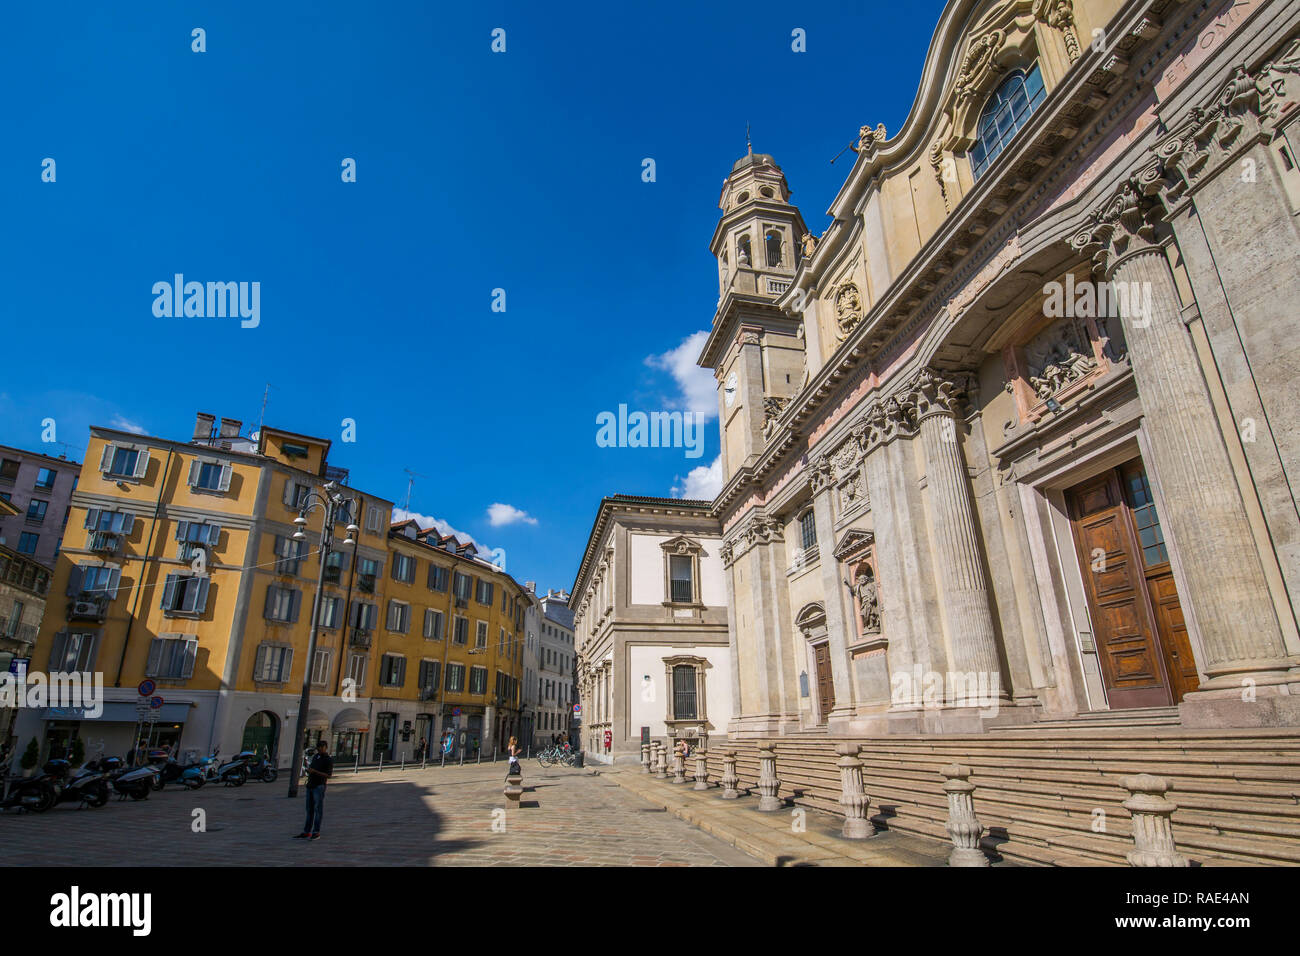 Church in Piazza Alessandro on a sunny day, Milan, Lombardy, Italy, Europe Stock Photo